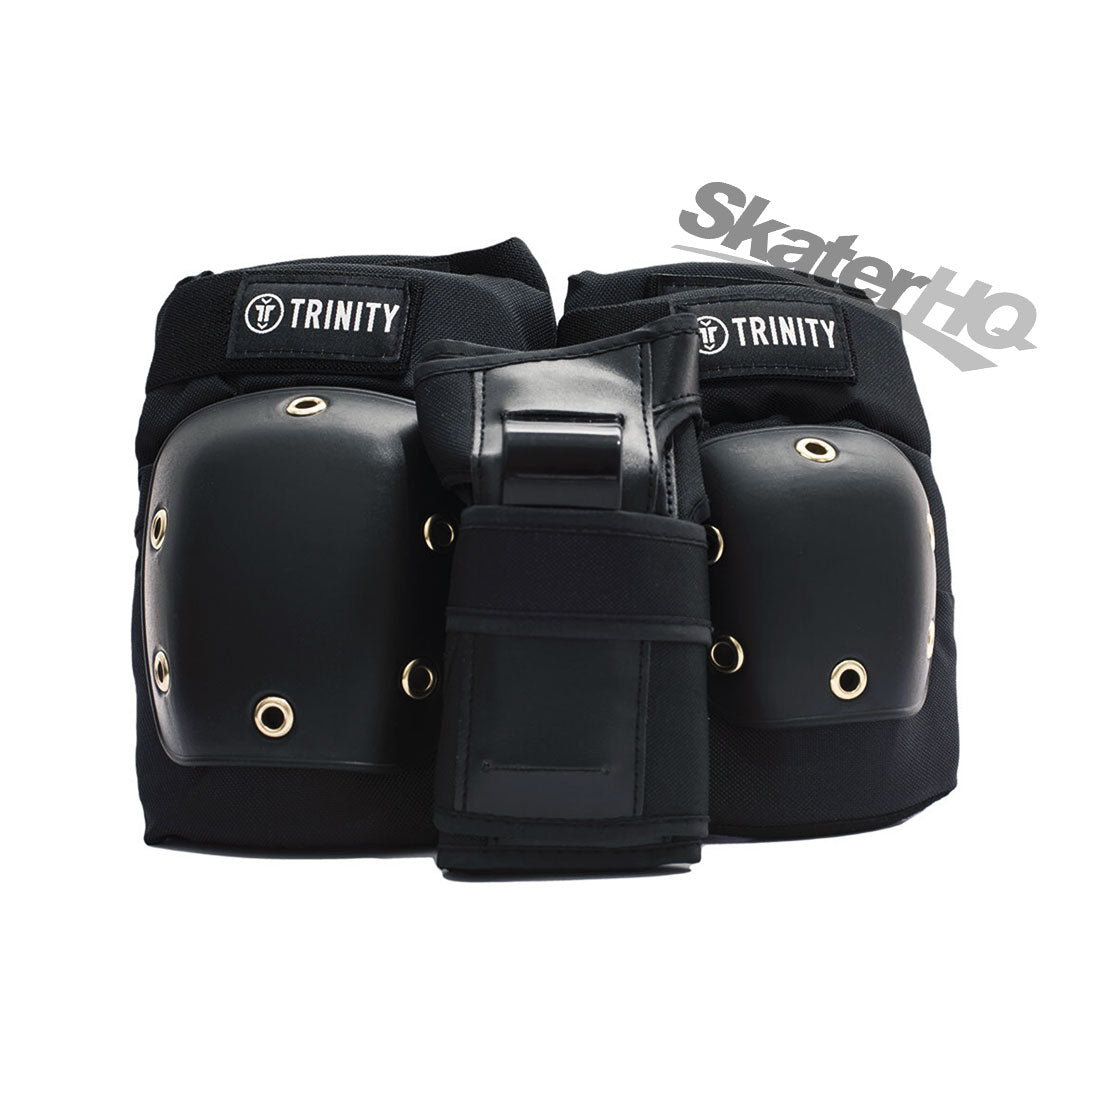 Trinity Tri-Pack Black - Small Protective Gear